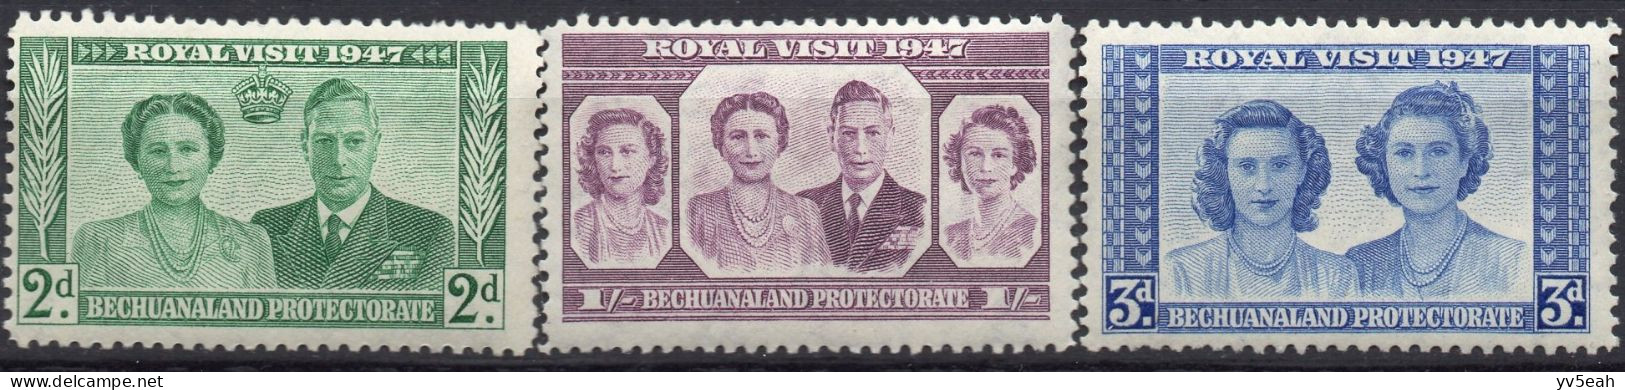 BECHUANALAND PROTECTORATE/1947/MNH/SC#144-6/KING GEORGE VI/ KGVI /ROYAL FAMILY VISIT ISSUED / PARTIAL SET - 1885-1964 Protectoraat Van Bechuanaland